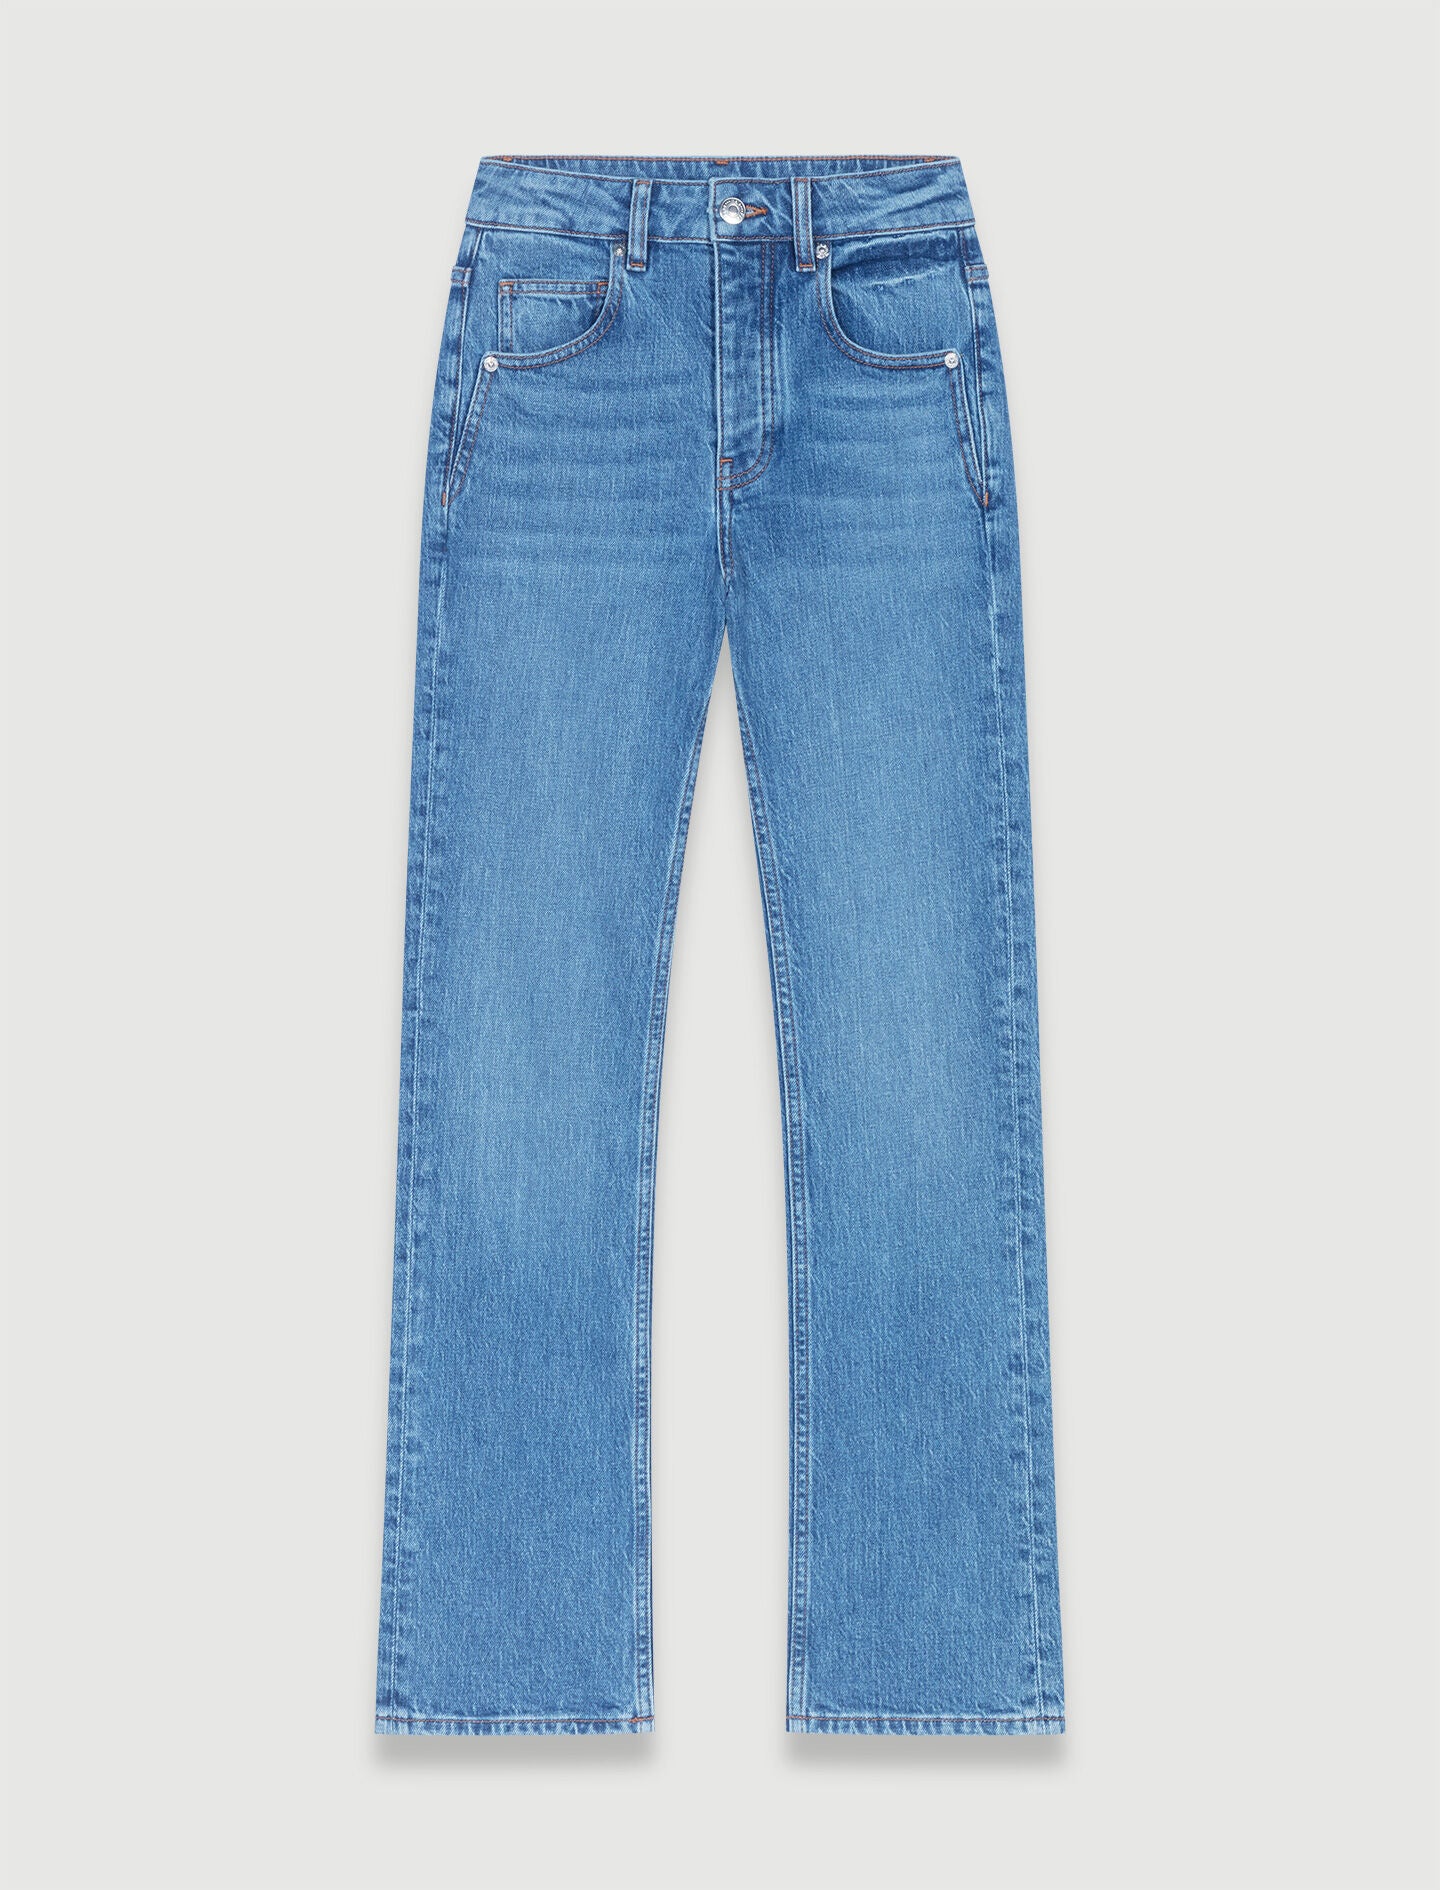 Blue-straight jeans